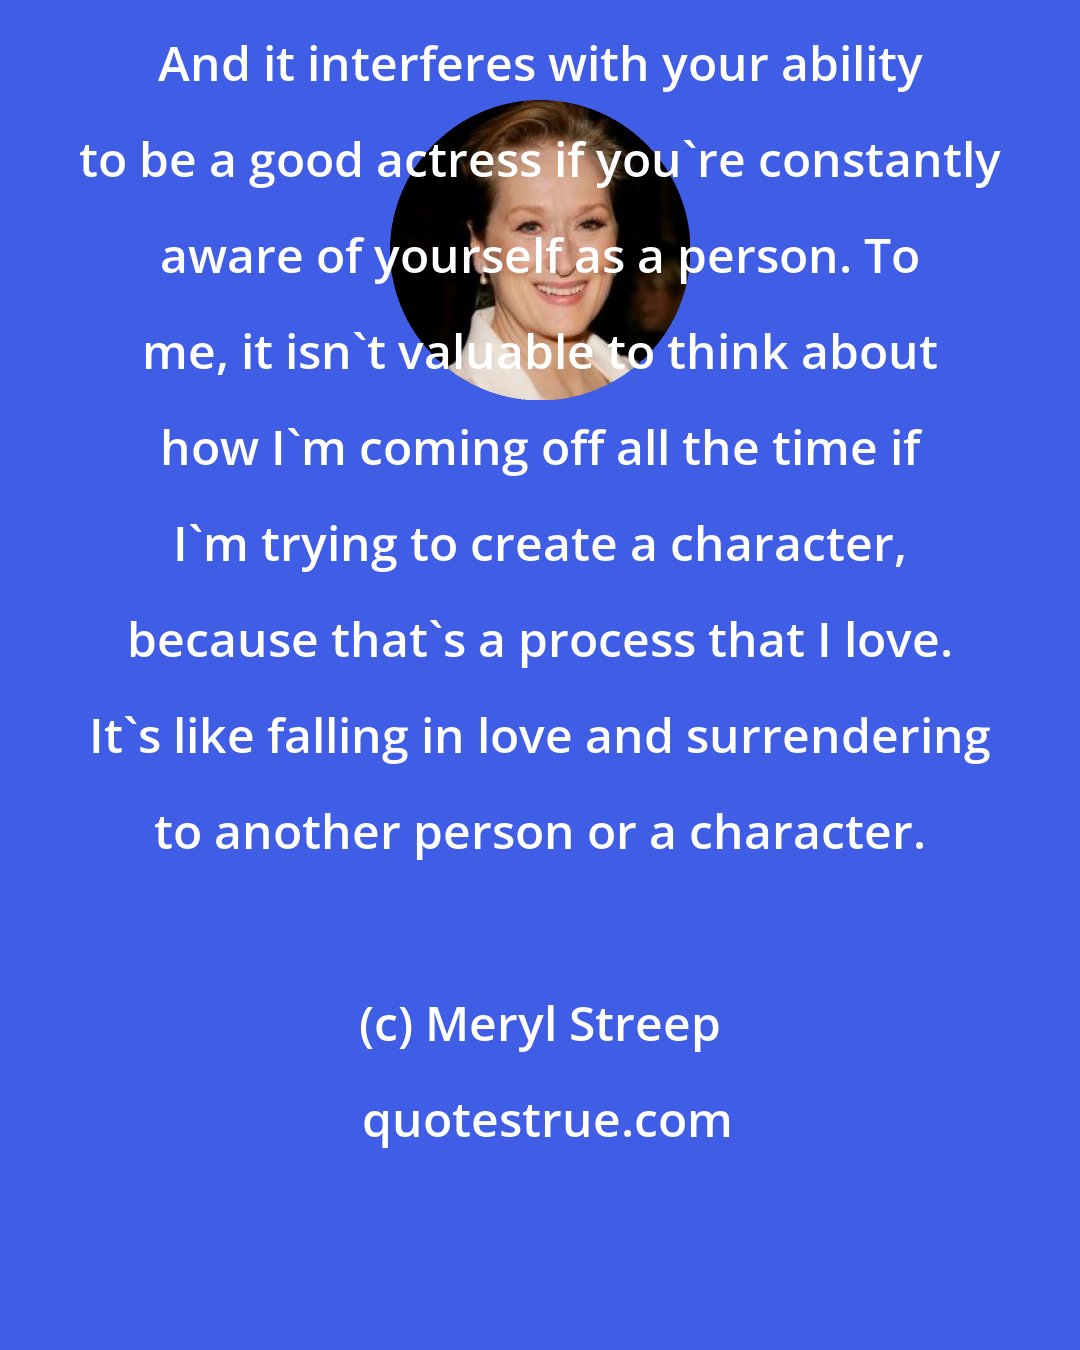 Meryl Streep: And it interferes with your ability to be a good actress if you're constantly aware of yourself as a person. To me, it isn't valuable to think about how I'm coming off all the time if I'm trying to create a character, because that's a process that I love. It's like falling in love and surrendering to another person or a character.